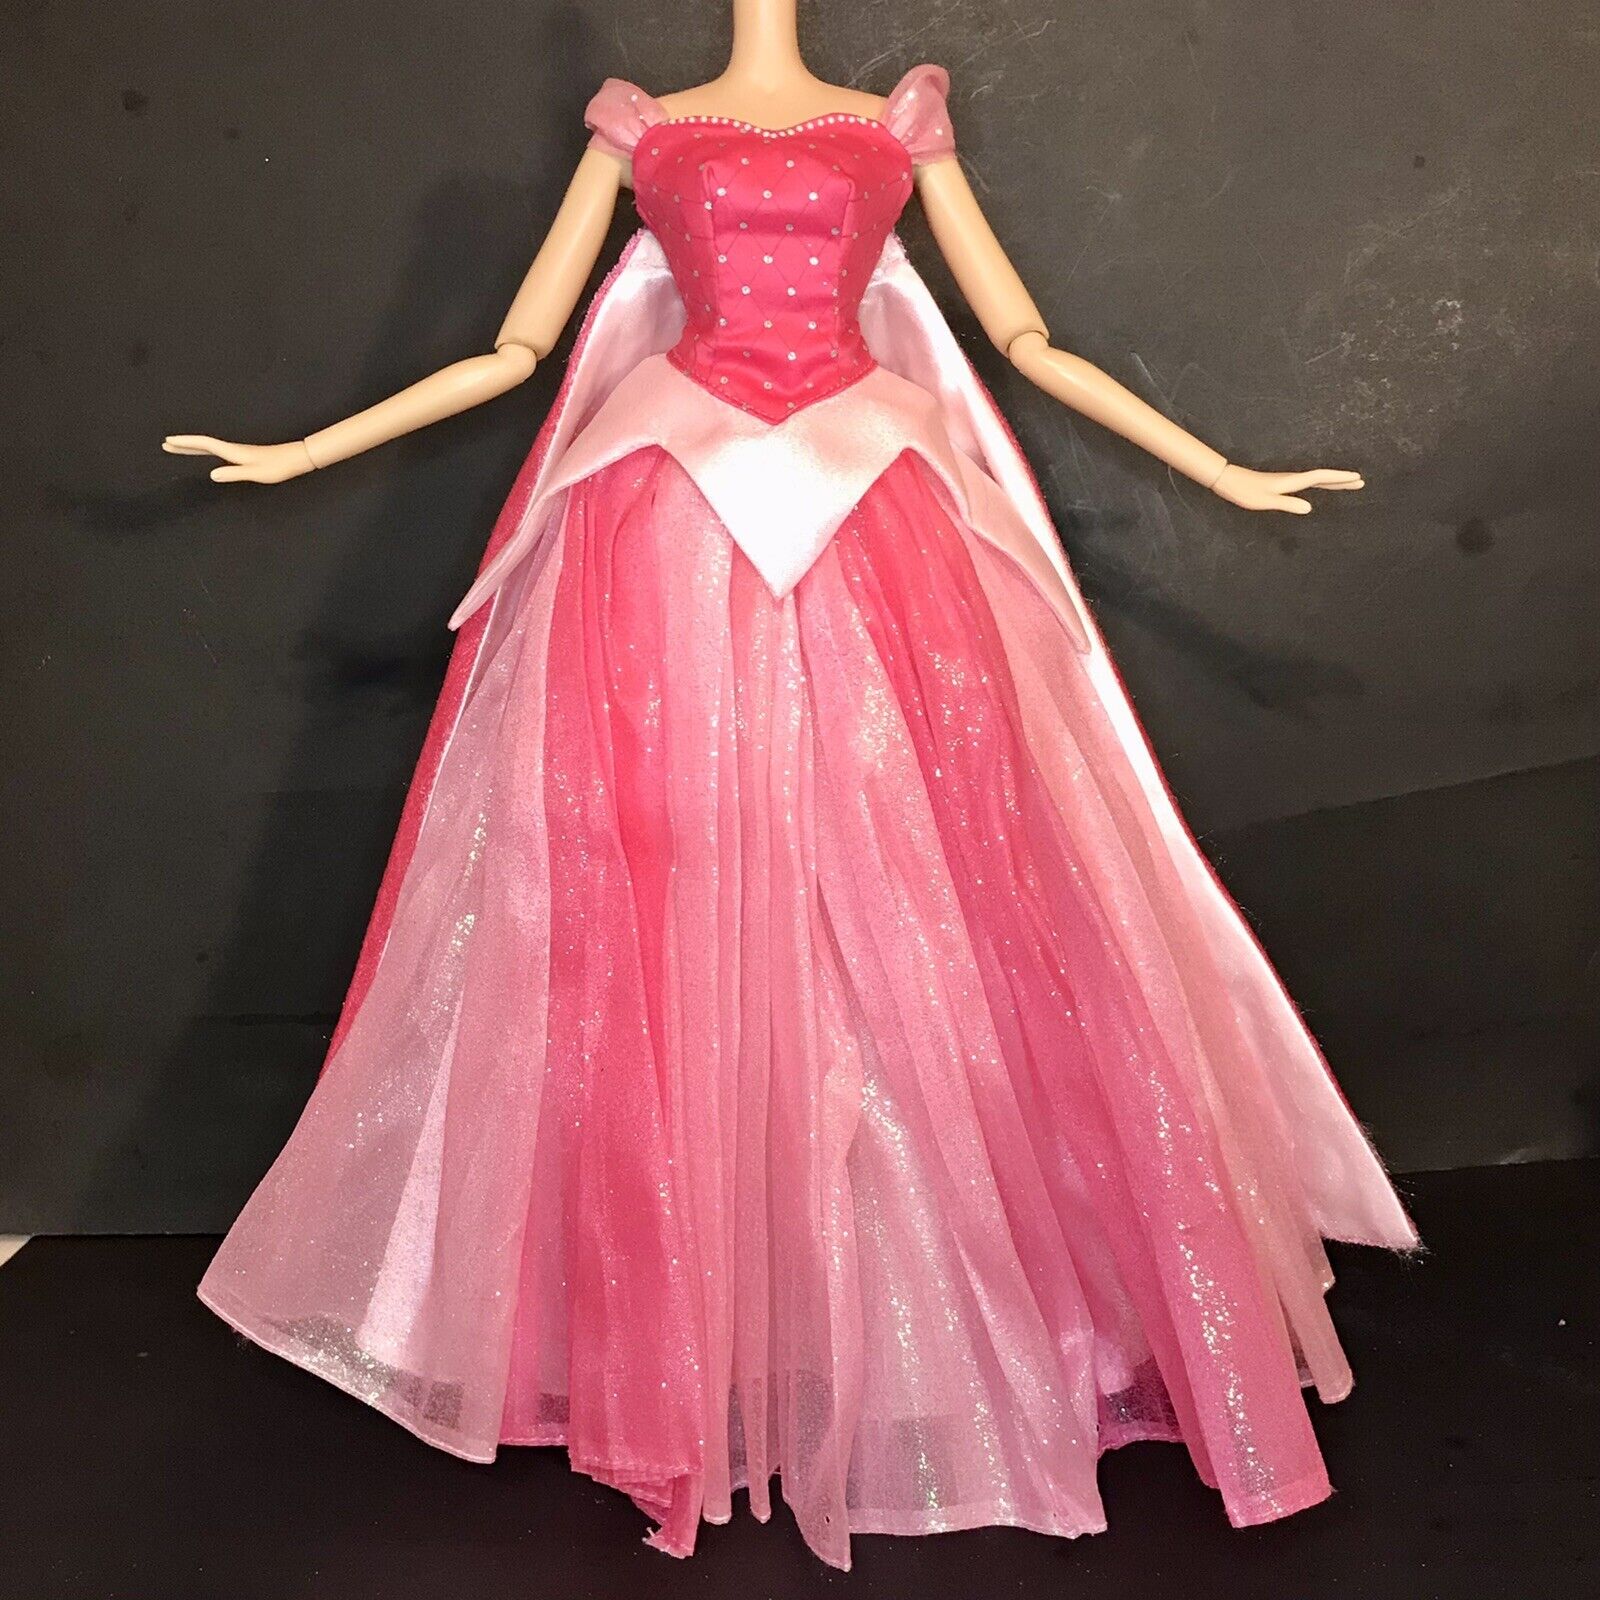 Disney 17” Limited Edition Doll Dress Outfit Sleeping Beauty Aurora Designer LE